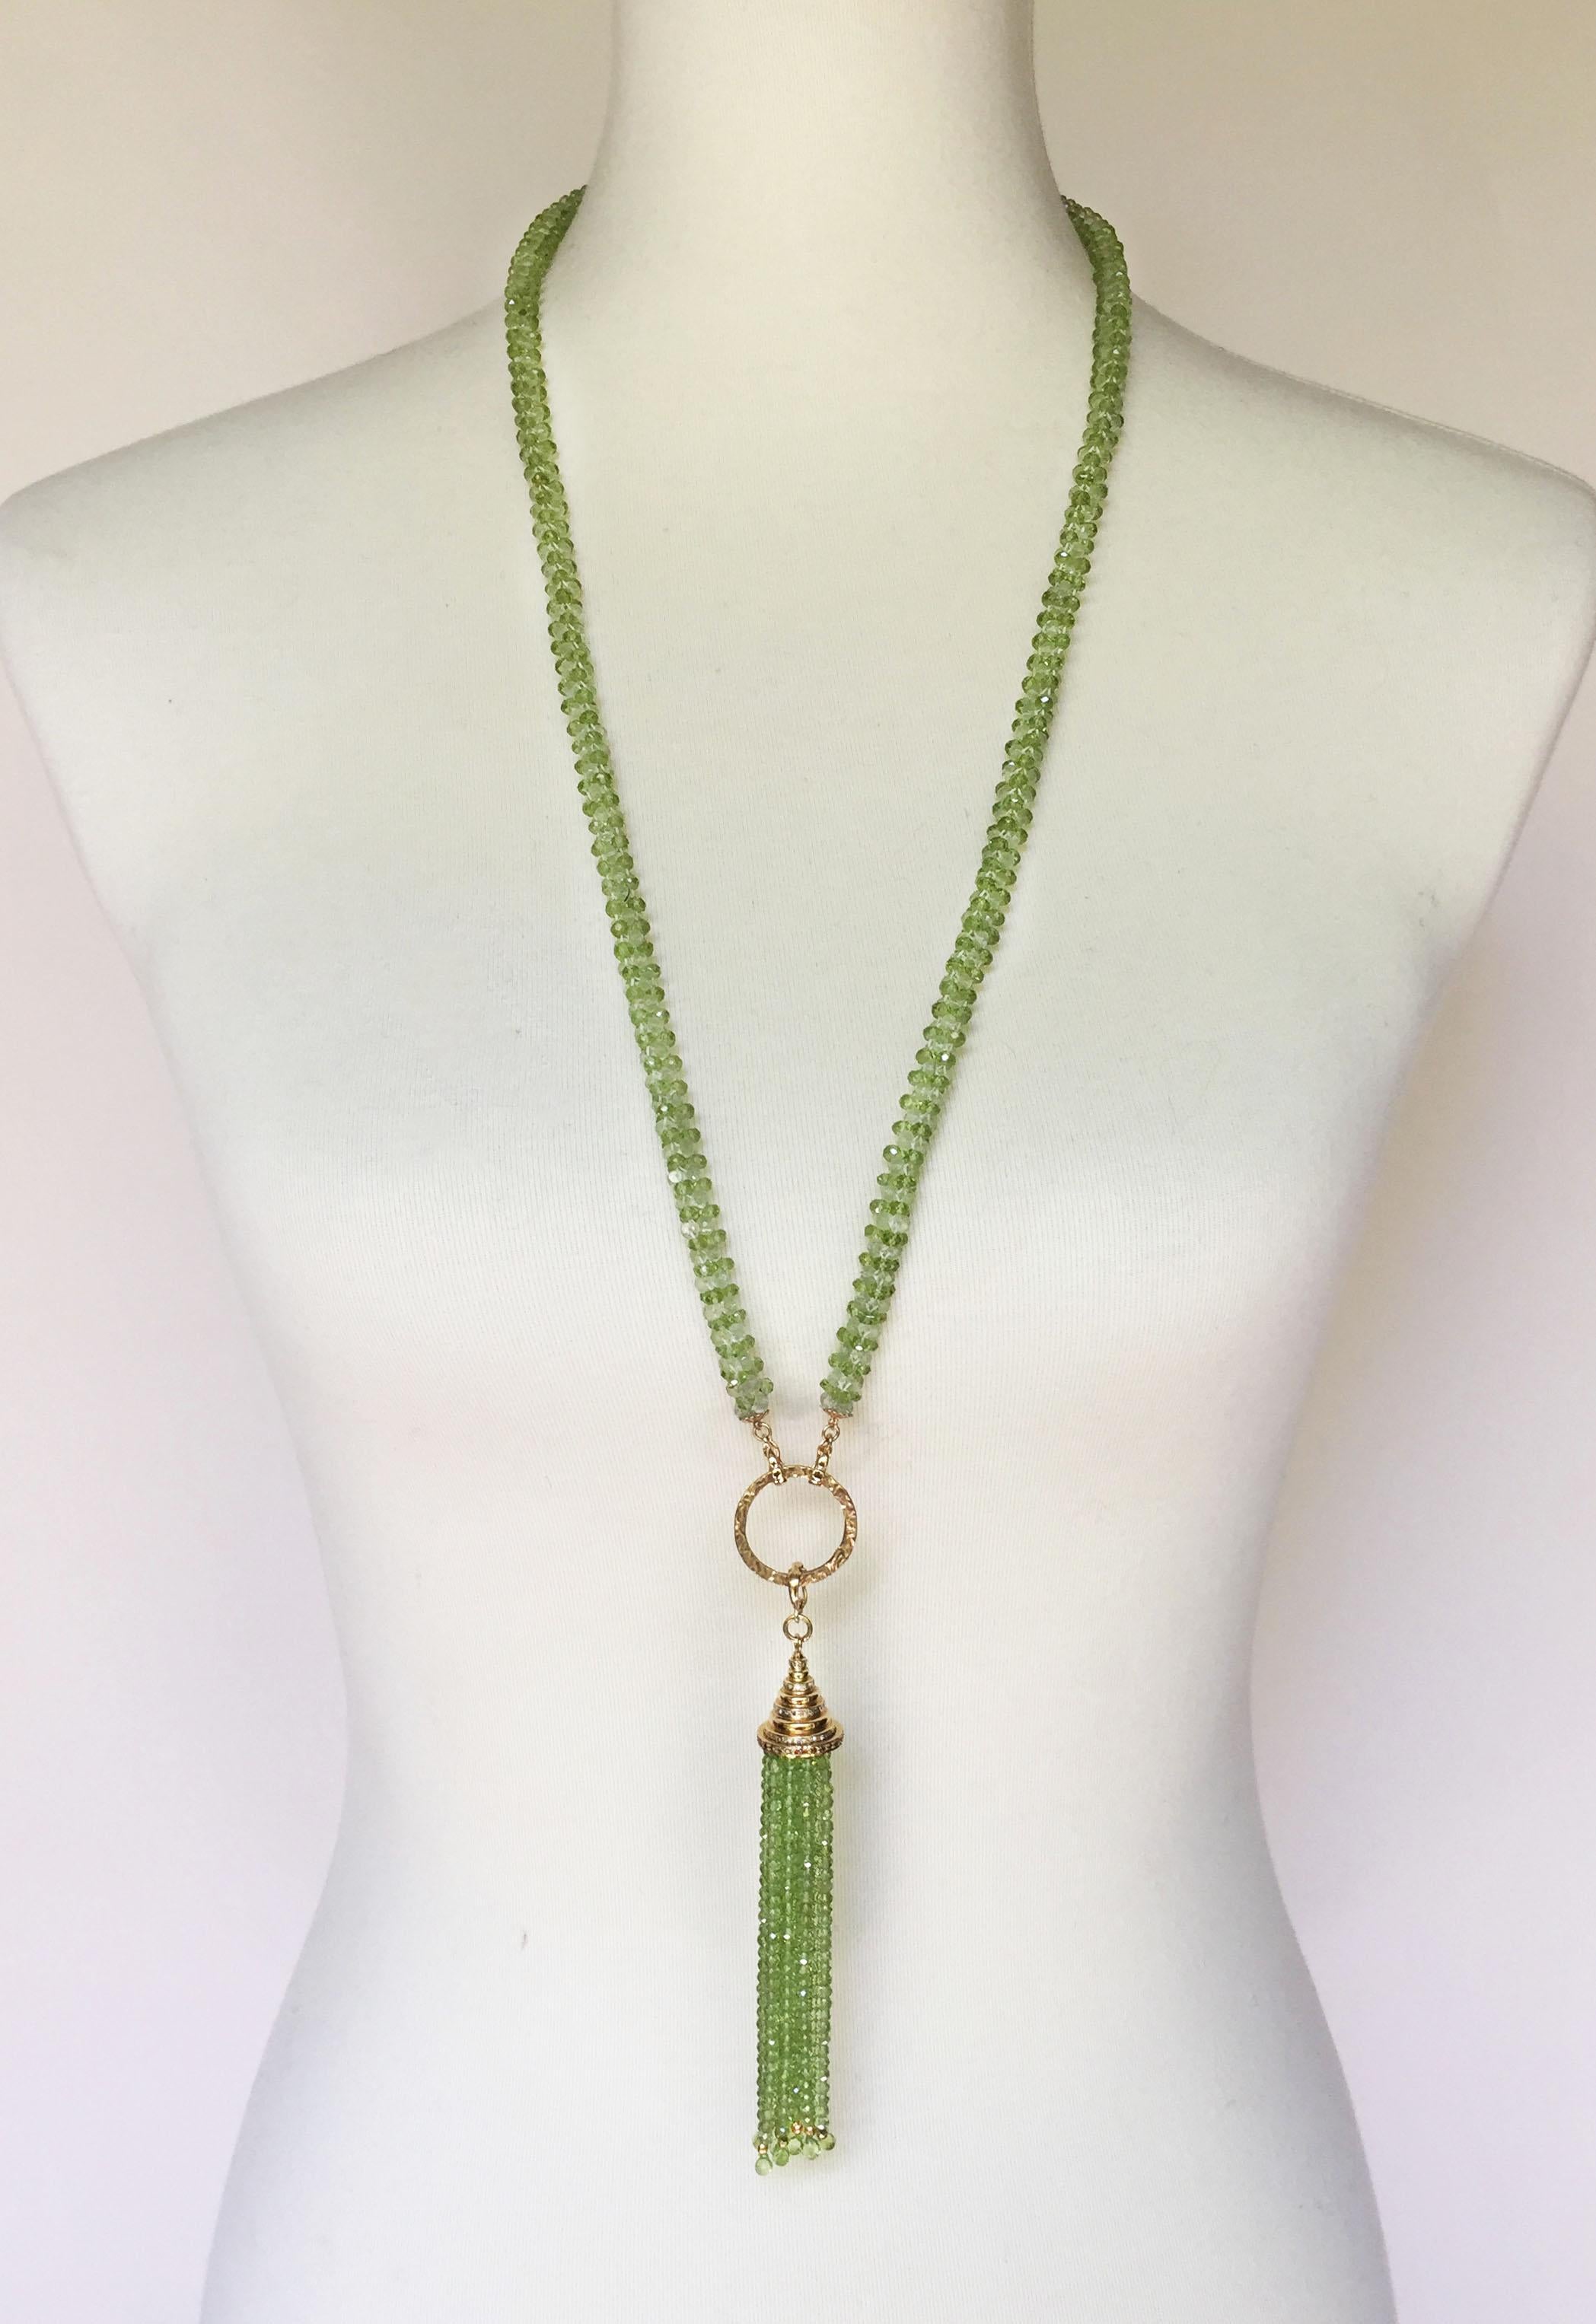 Artist Peridot Tassel Rope Necklace with 14k Yellow Gold, Gold Plated Cup, and Diamonds